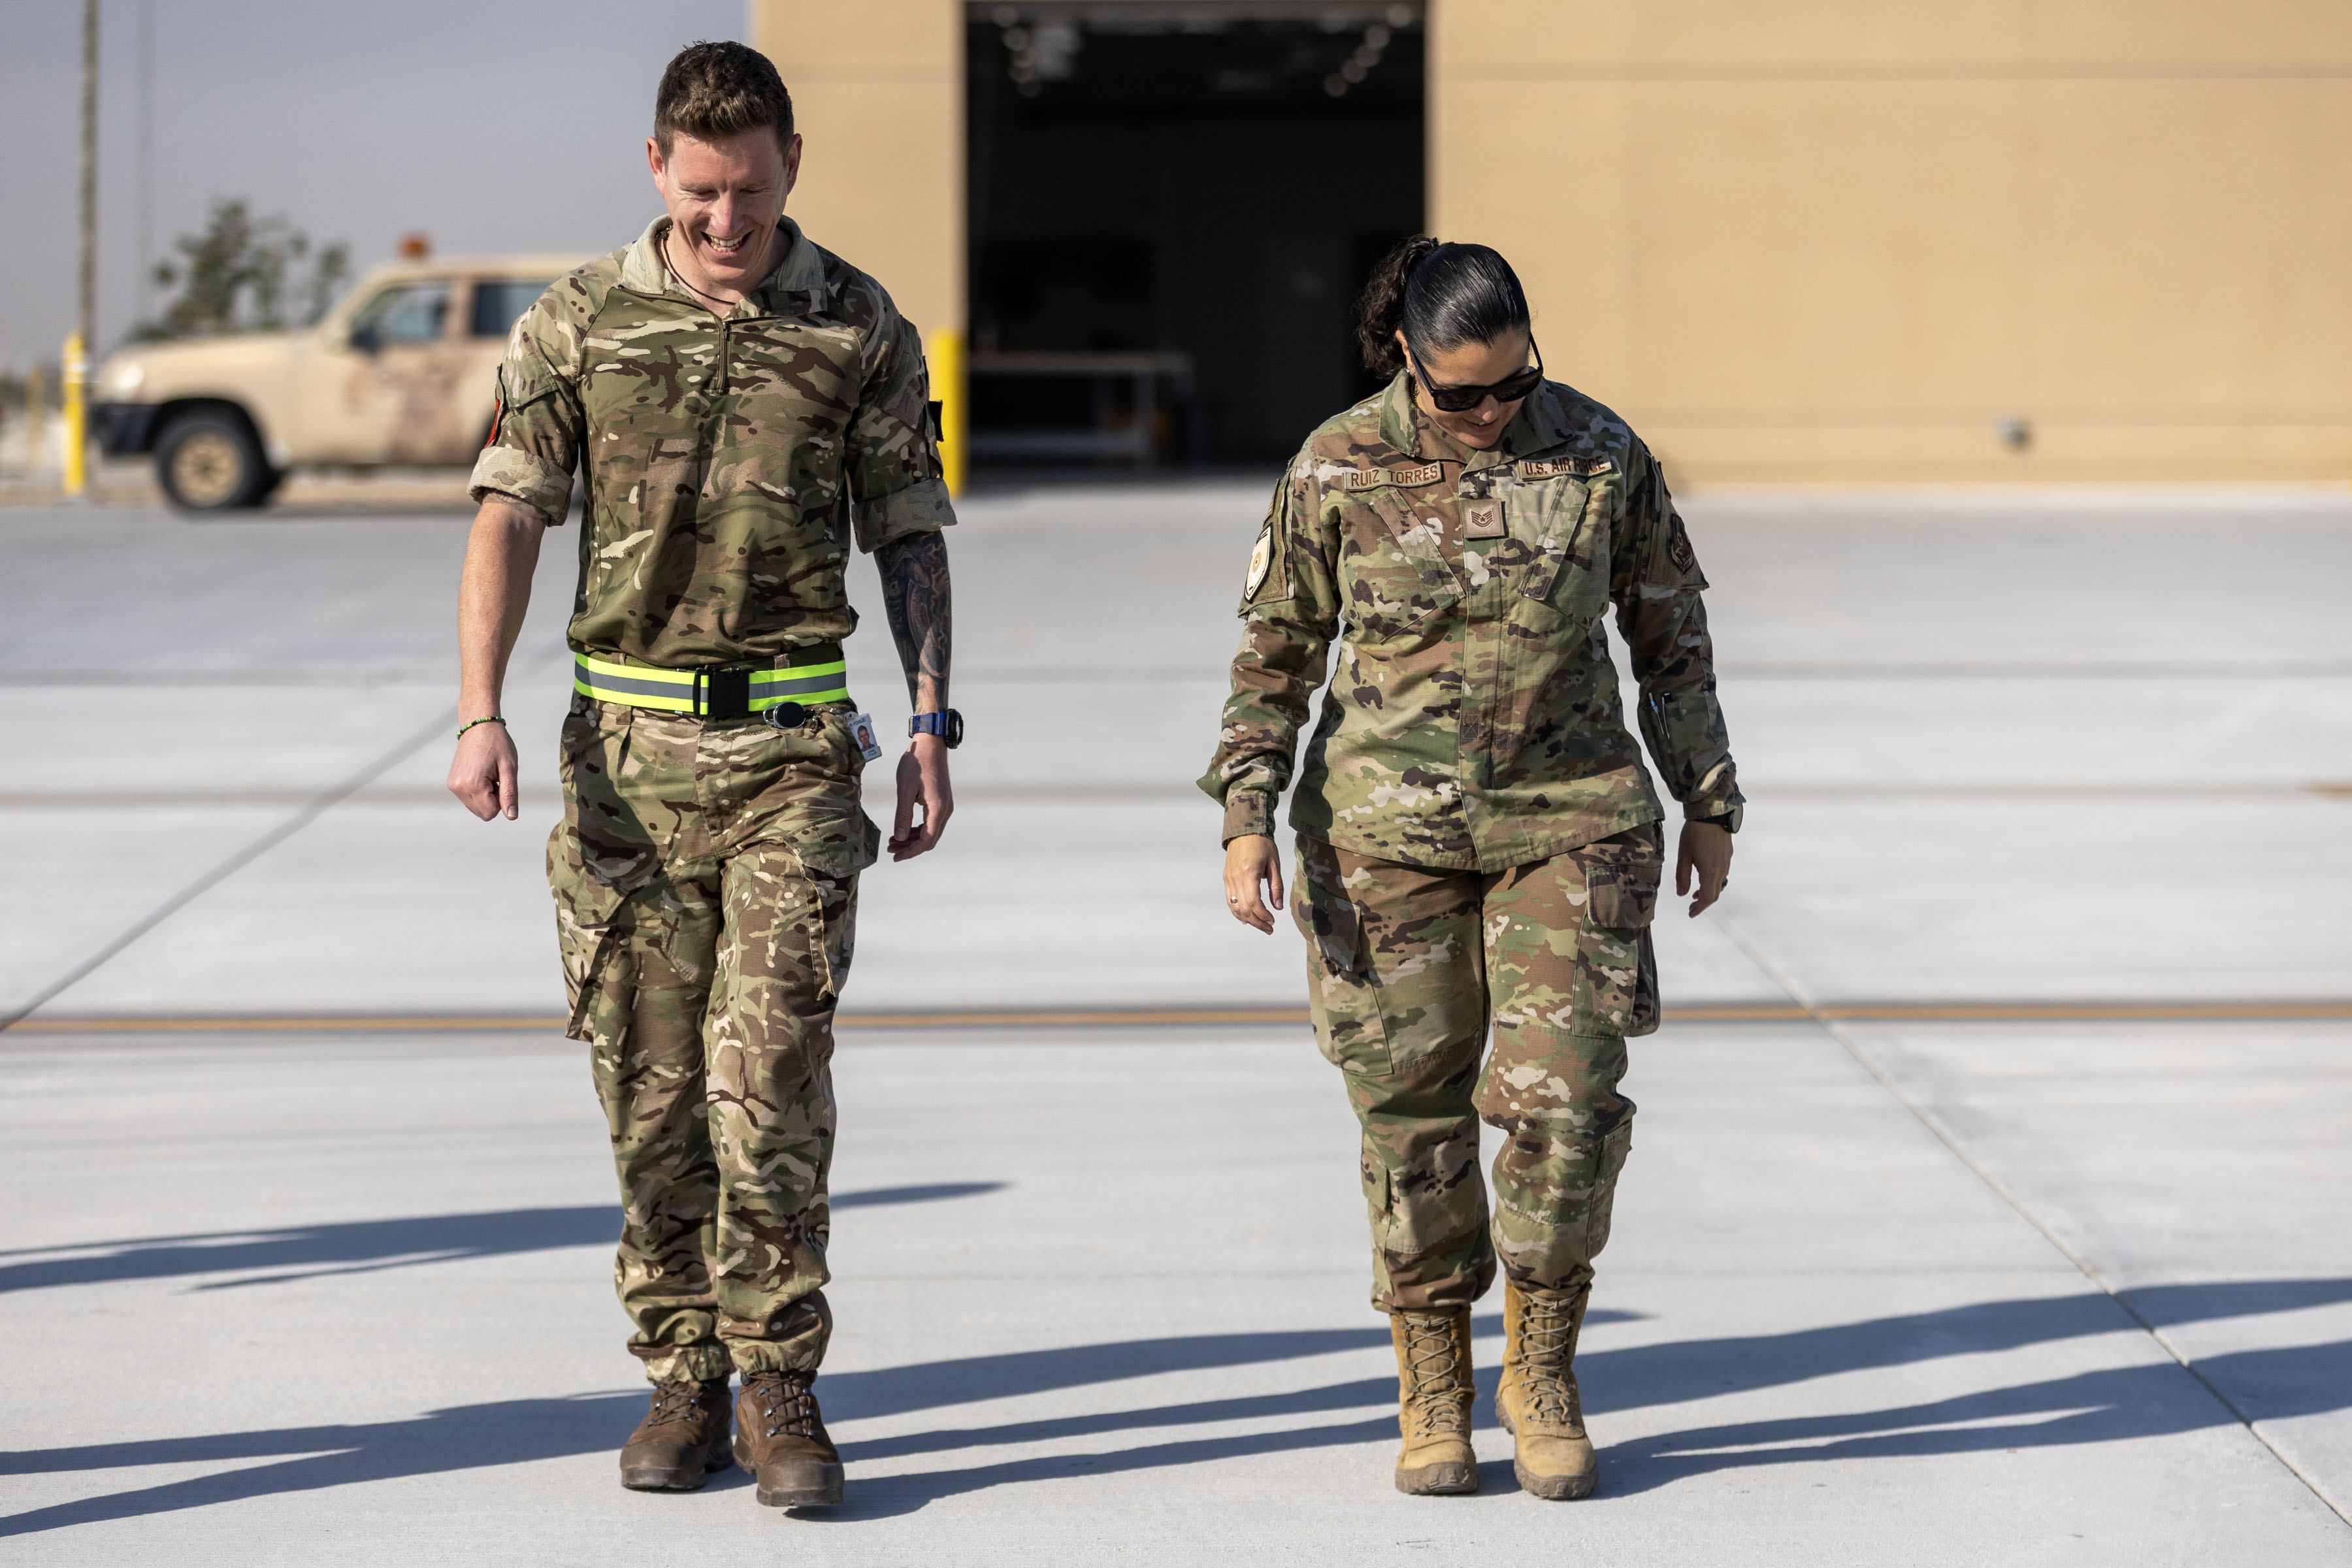 Two servicepeople walking together